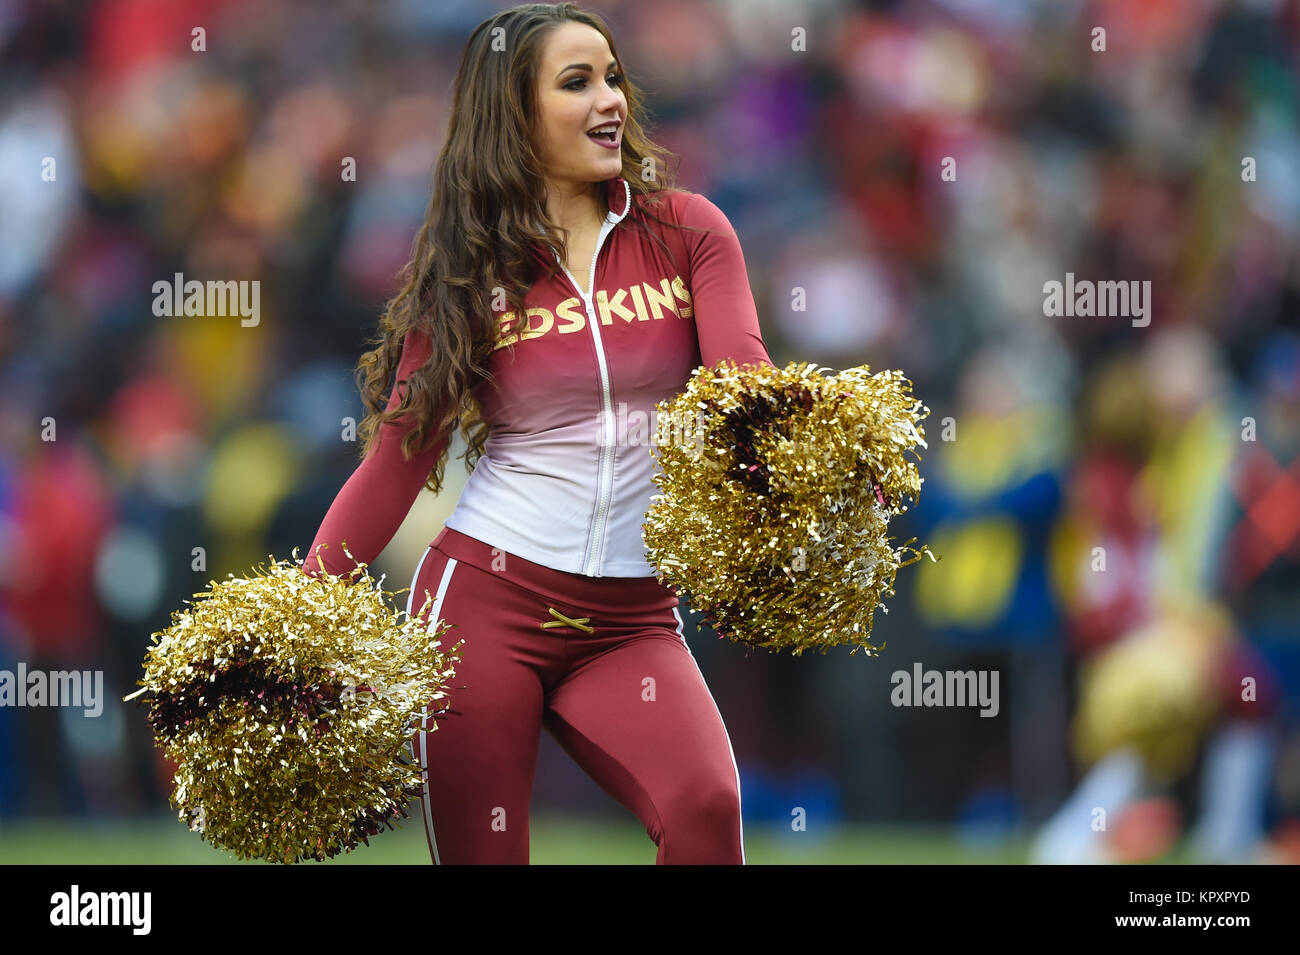 Landover, MD, USA. 17th Dec, 2017. A Washington Redskin cheerleader performs during the matchup between the Arizona Cardinals and the Washington Redskins at FedEx Field in Landover, MD. Credit: csm/Alamy Live News Stock Photo